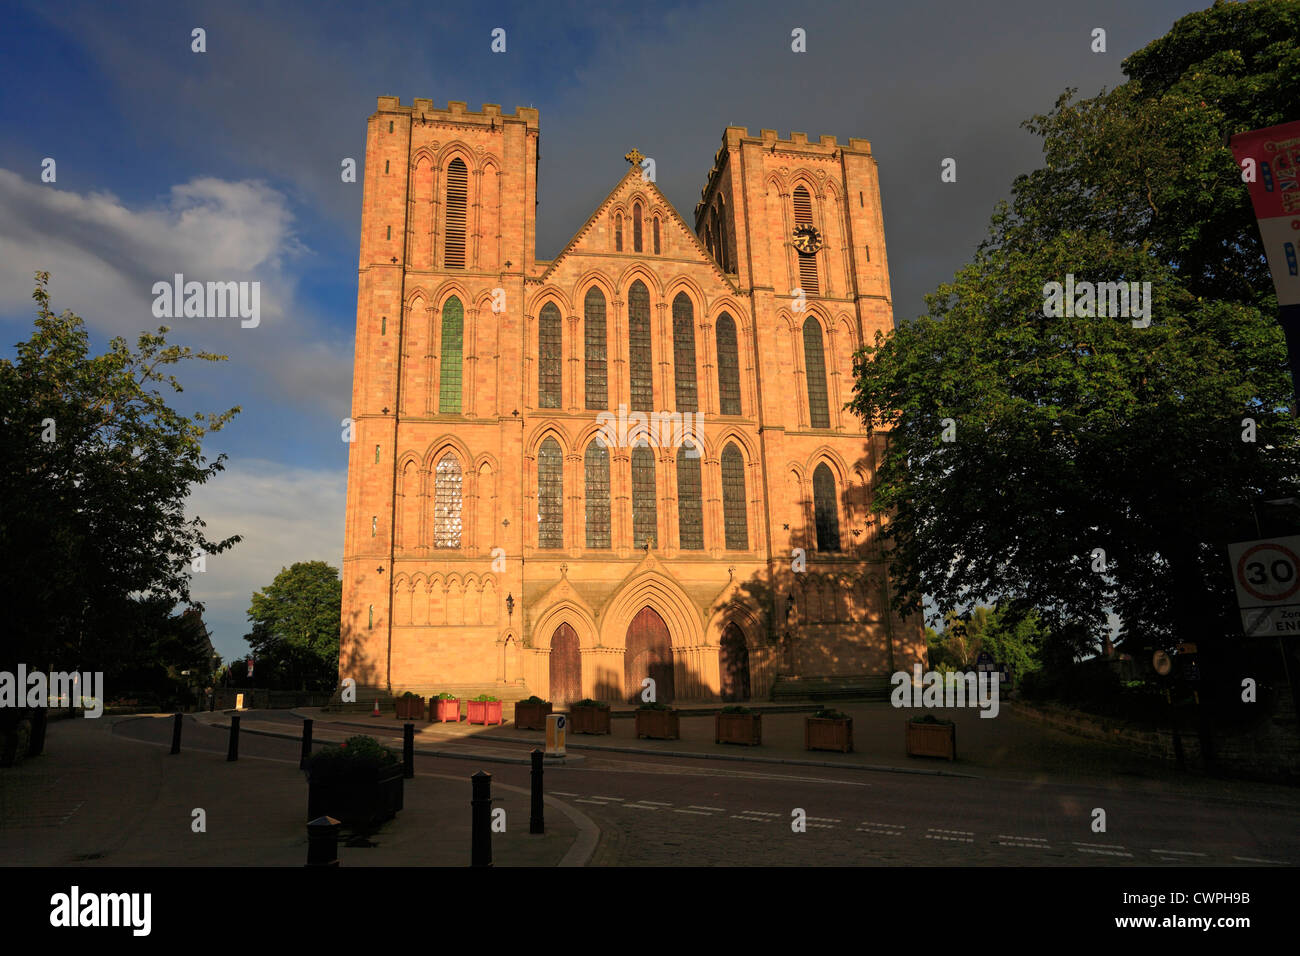 The West front of Ripon Cathedral in evening sunlight, Ripon, North Yorkshire, England, UK. Stock Photo